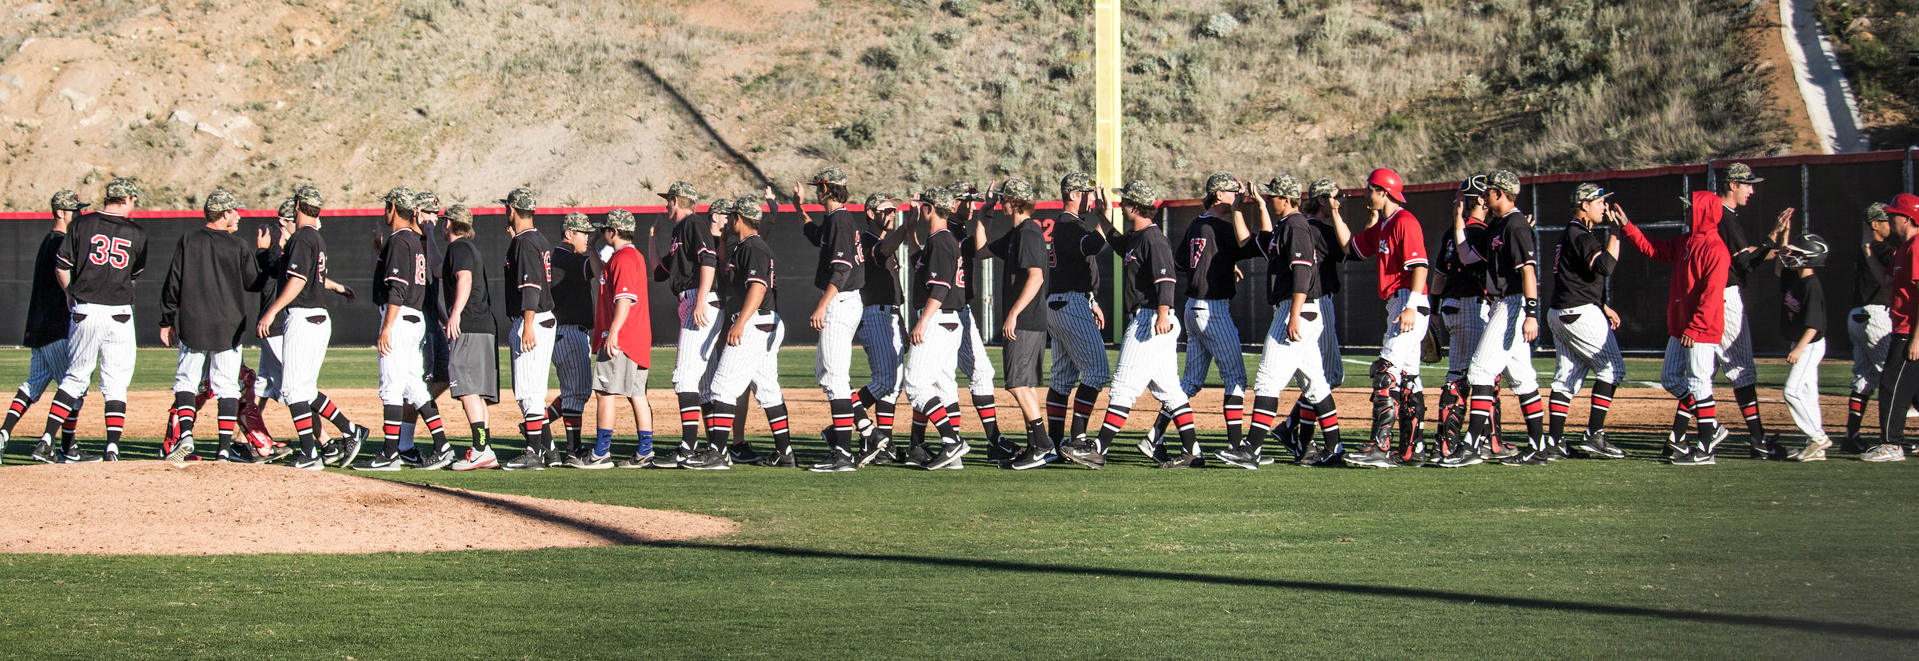 Palomar comes from behind to defeat Fullerton